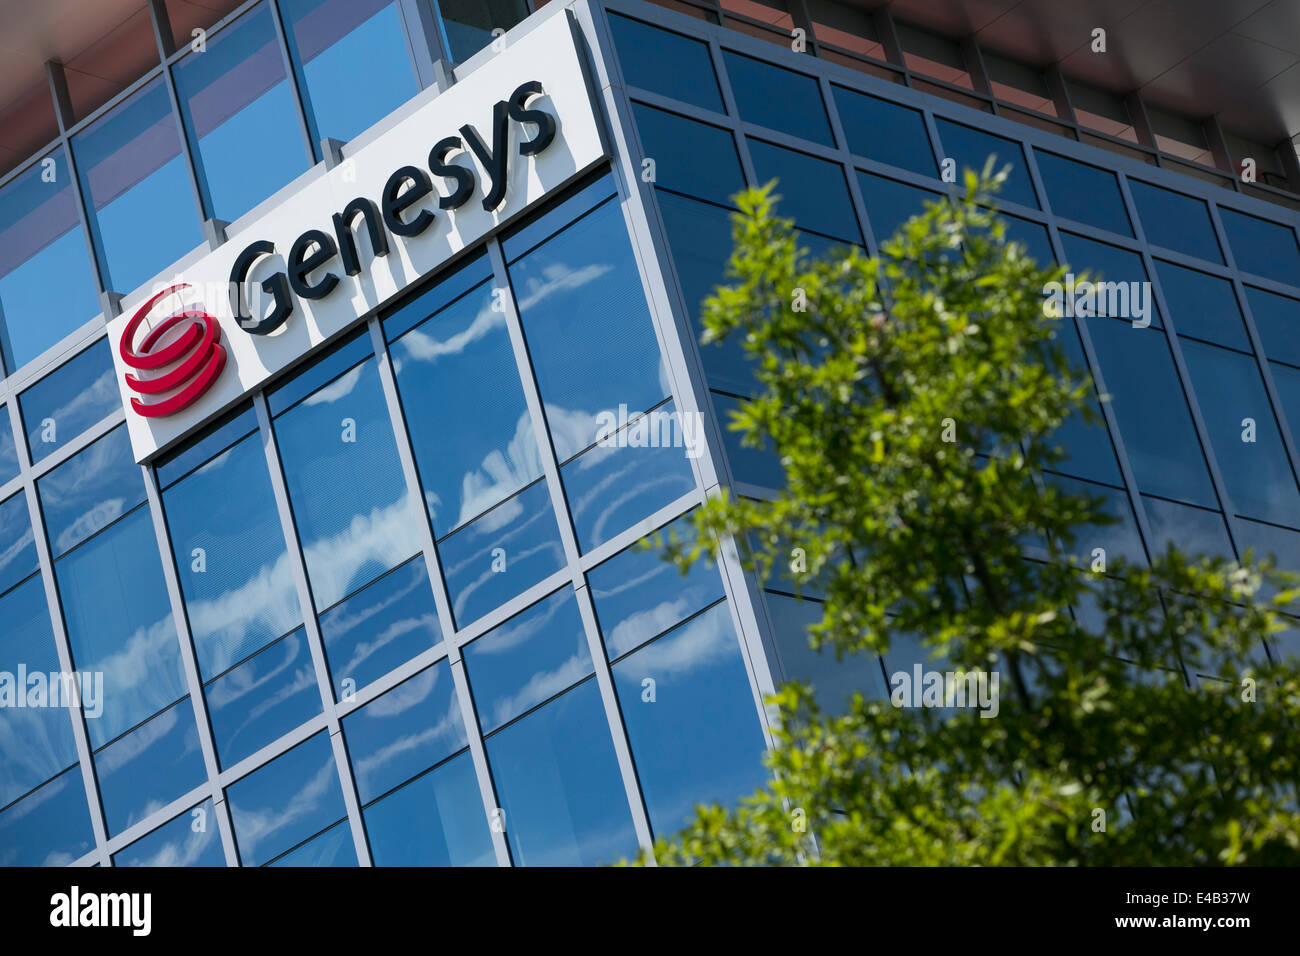 An office building occupied by the telecommunications technology company Genesys.  Stock Photo